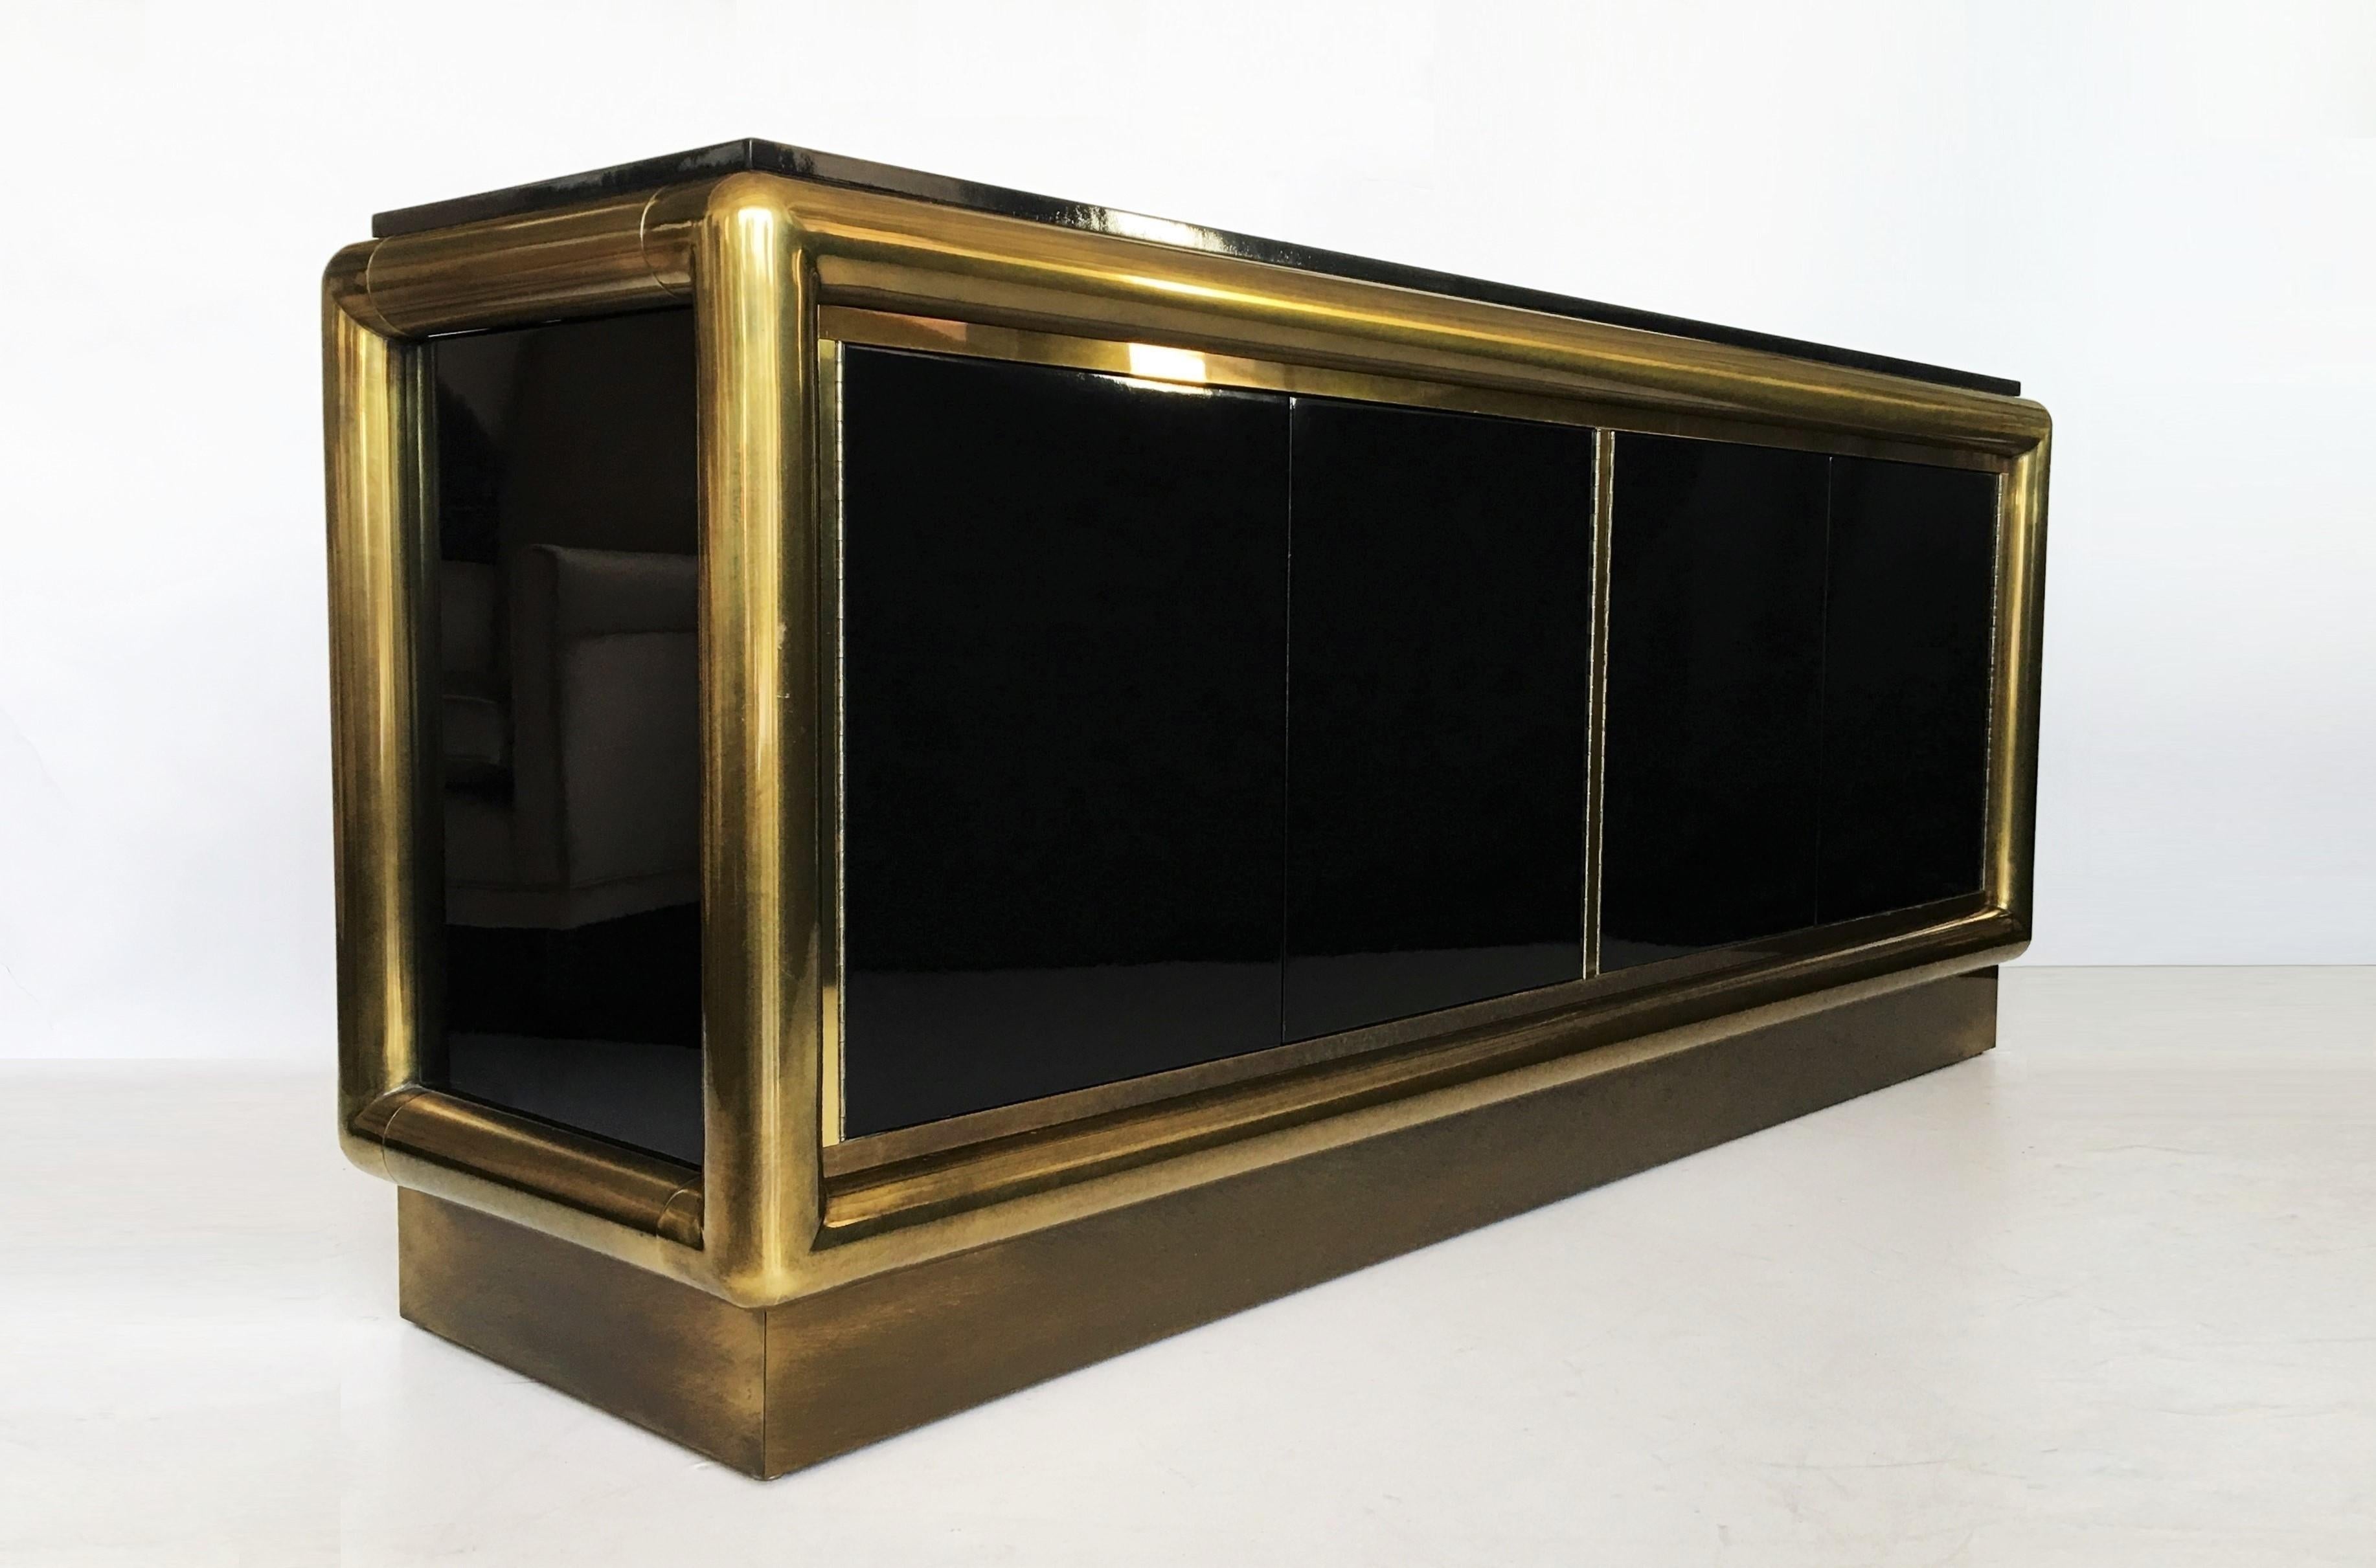 Glamorous one-of-a-kind piece designed by the great Mastercraft in Grand Rapids. Features a massive tubular brass framed body, both sides have a gentle curve. Top and sides are finished in black lacquer with graphic brass trim pieces and back is